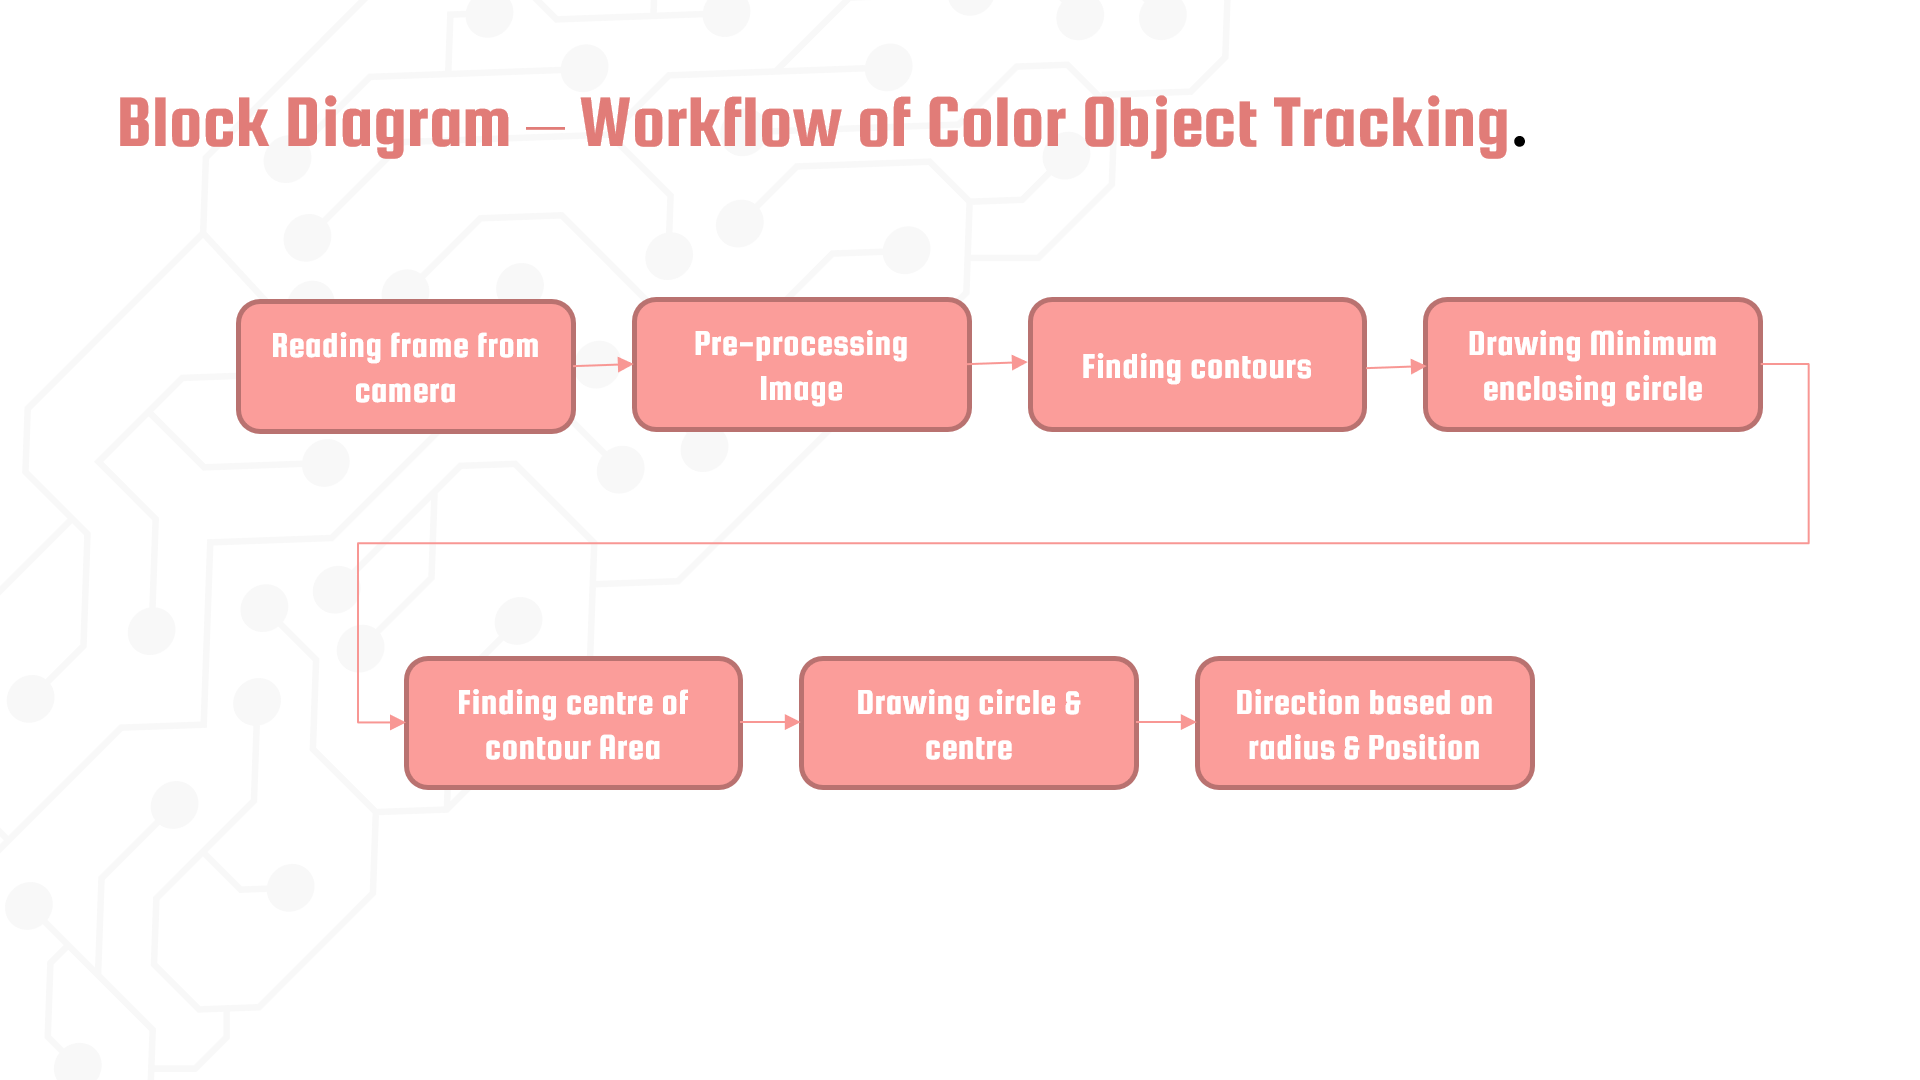 Object Tracking based on Colors